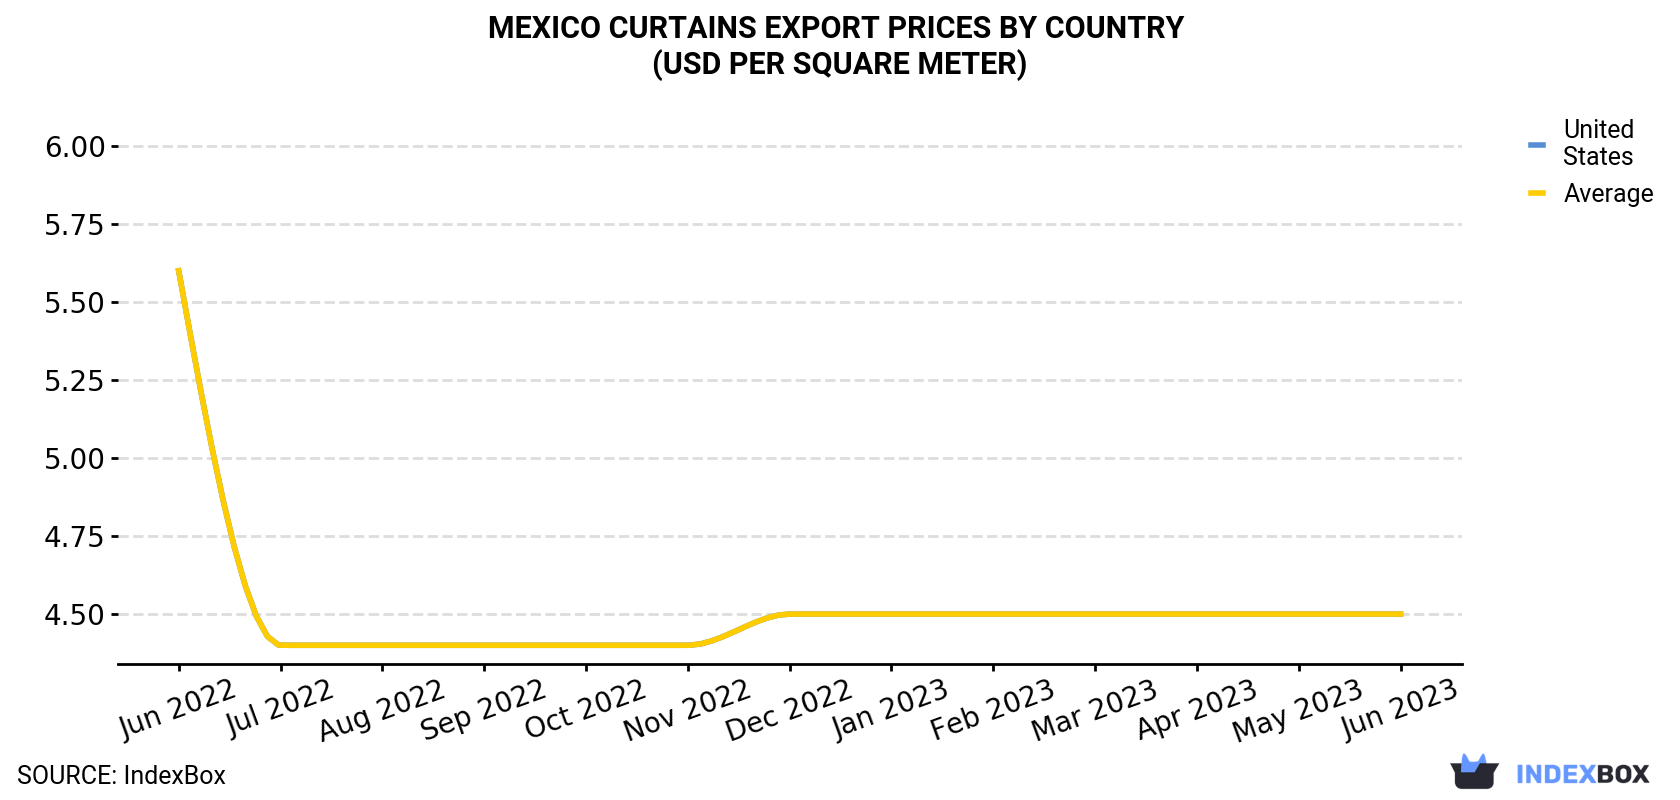 Mexico Curtains Export Prices By Country (USD Per Square Meter)